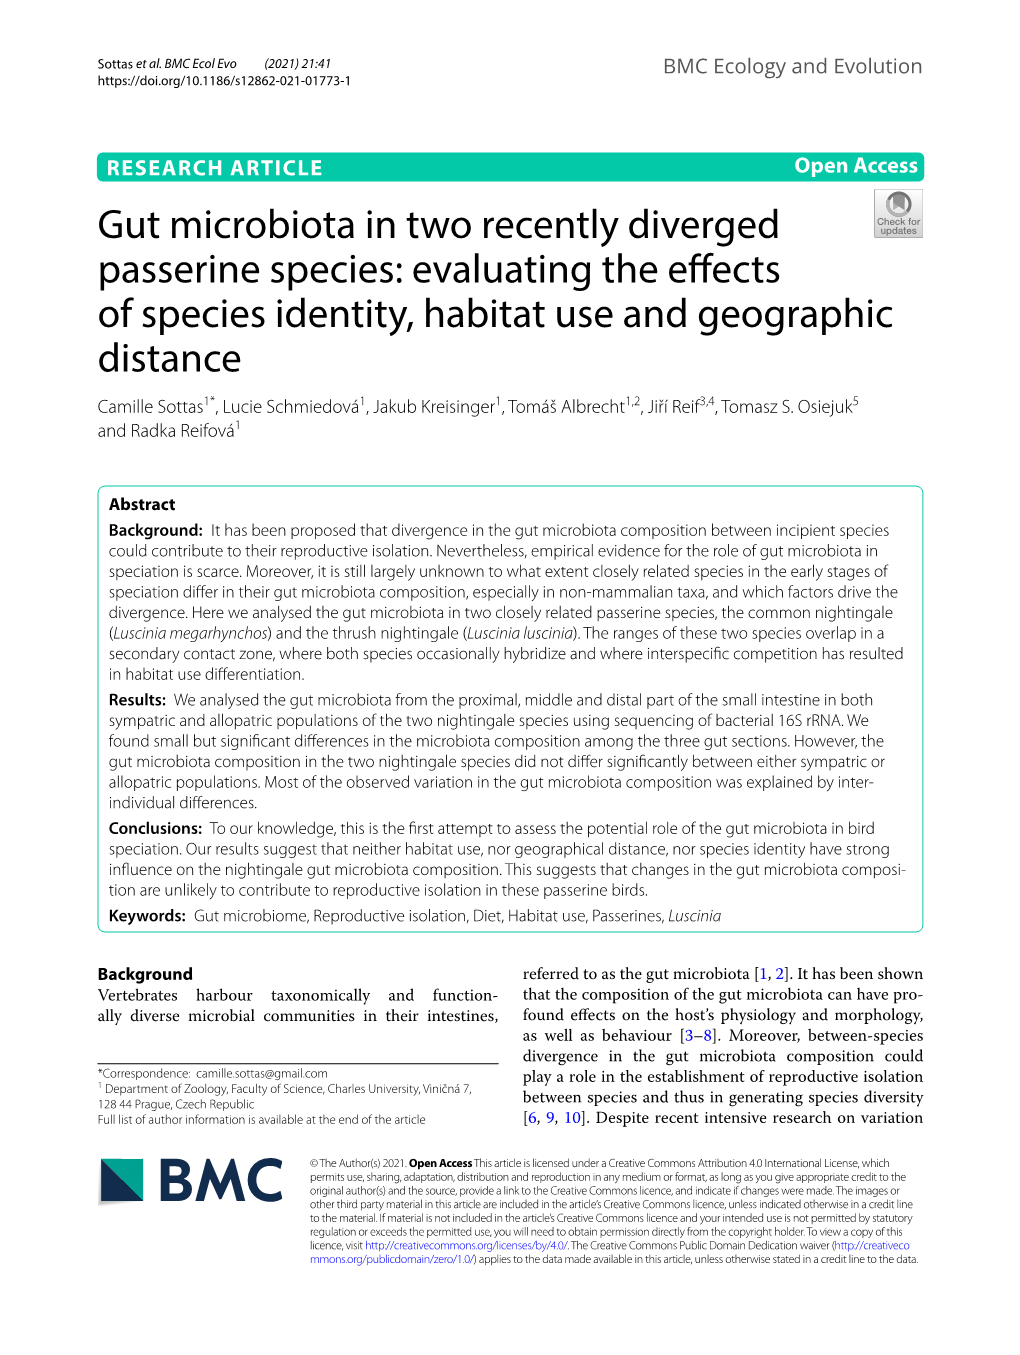 Gut Microbiota in Two Recently Diverged Passerine Species